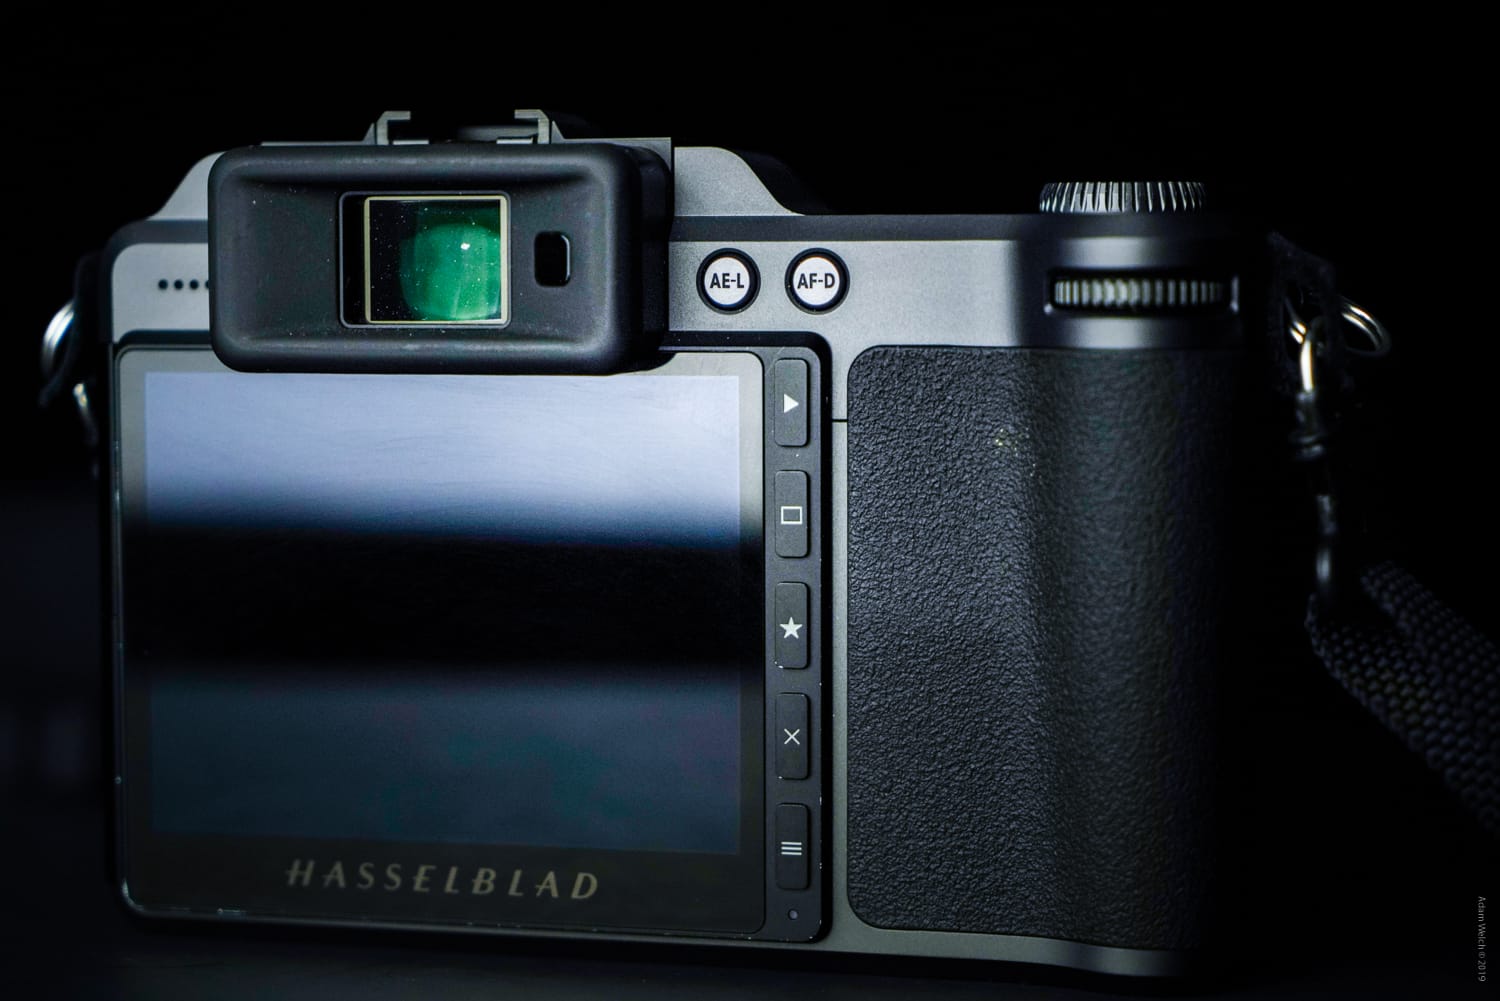 Review of the Hasselblad X1D II 50C Medium Format Mirrorless Camera